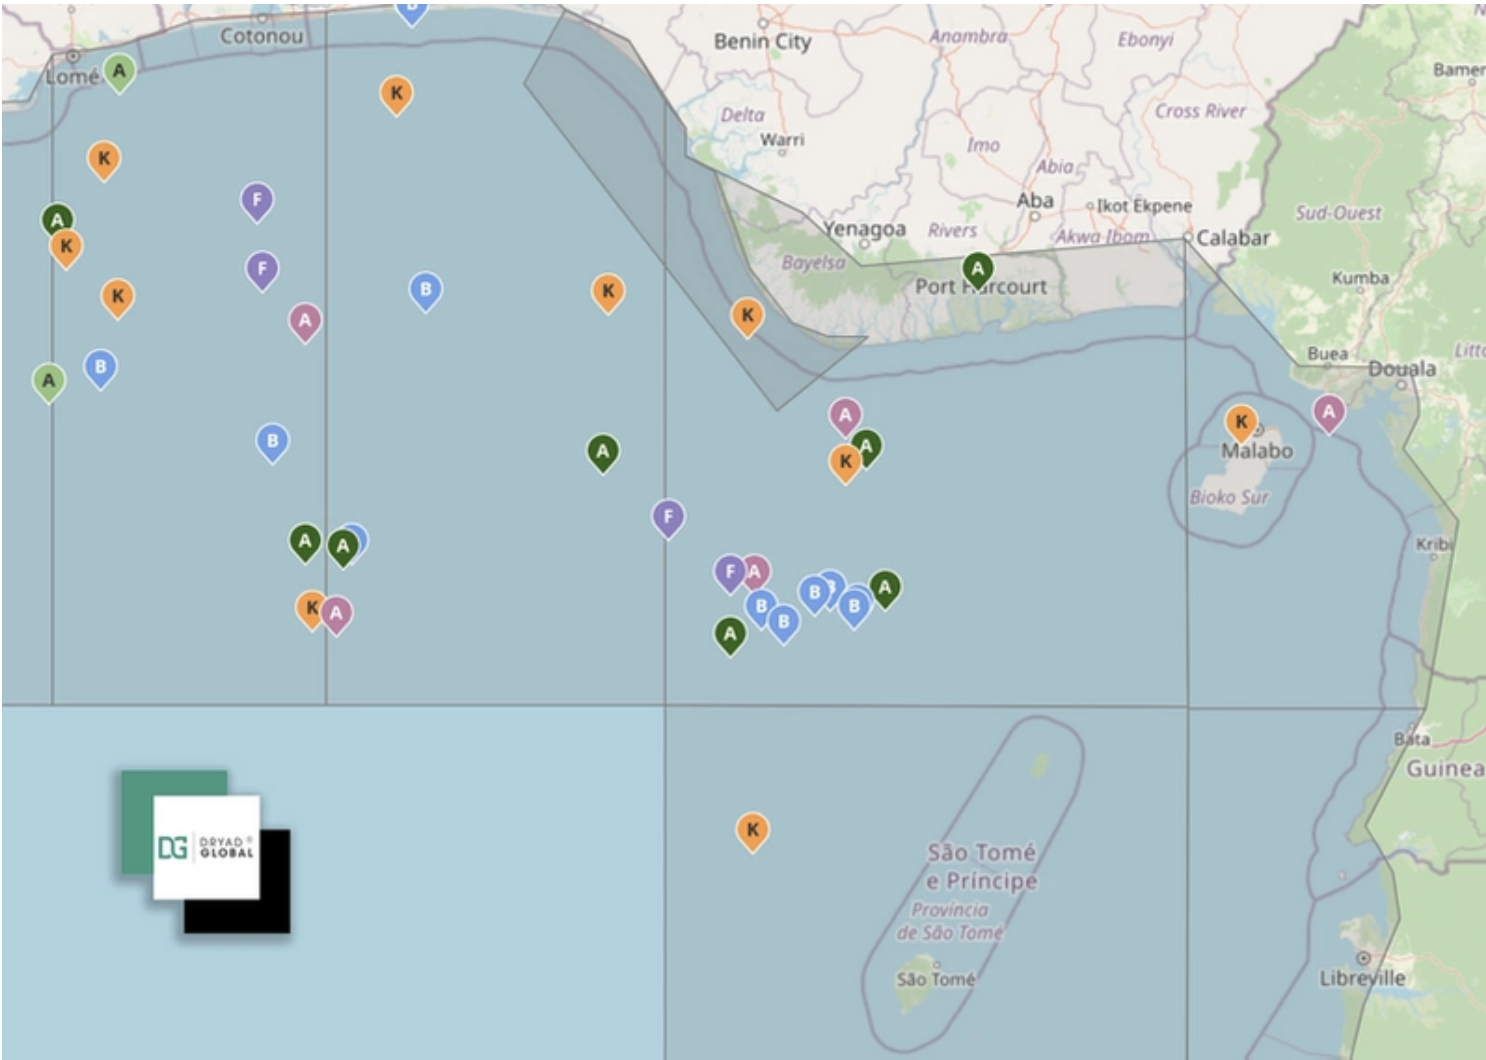 Gulf of Guinea incidents 2020